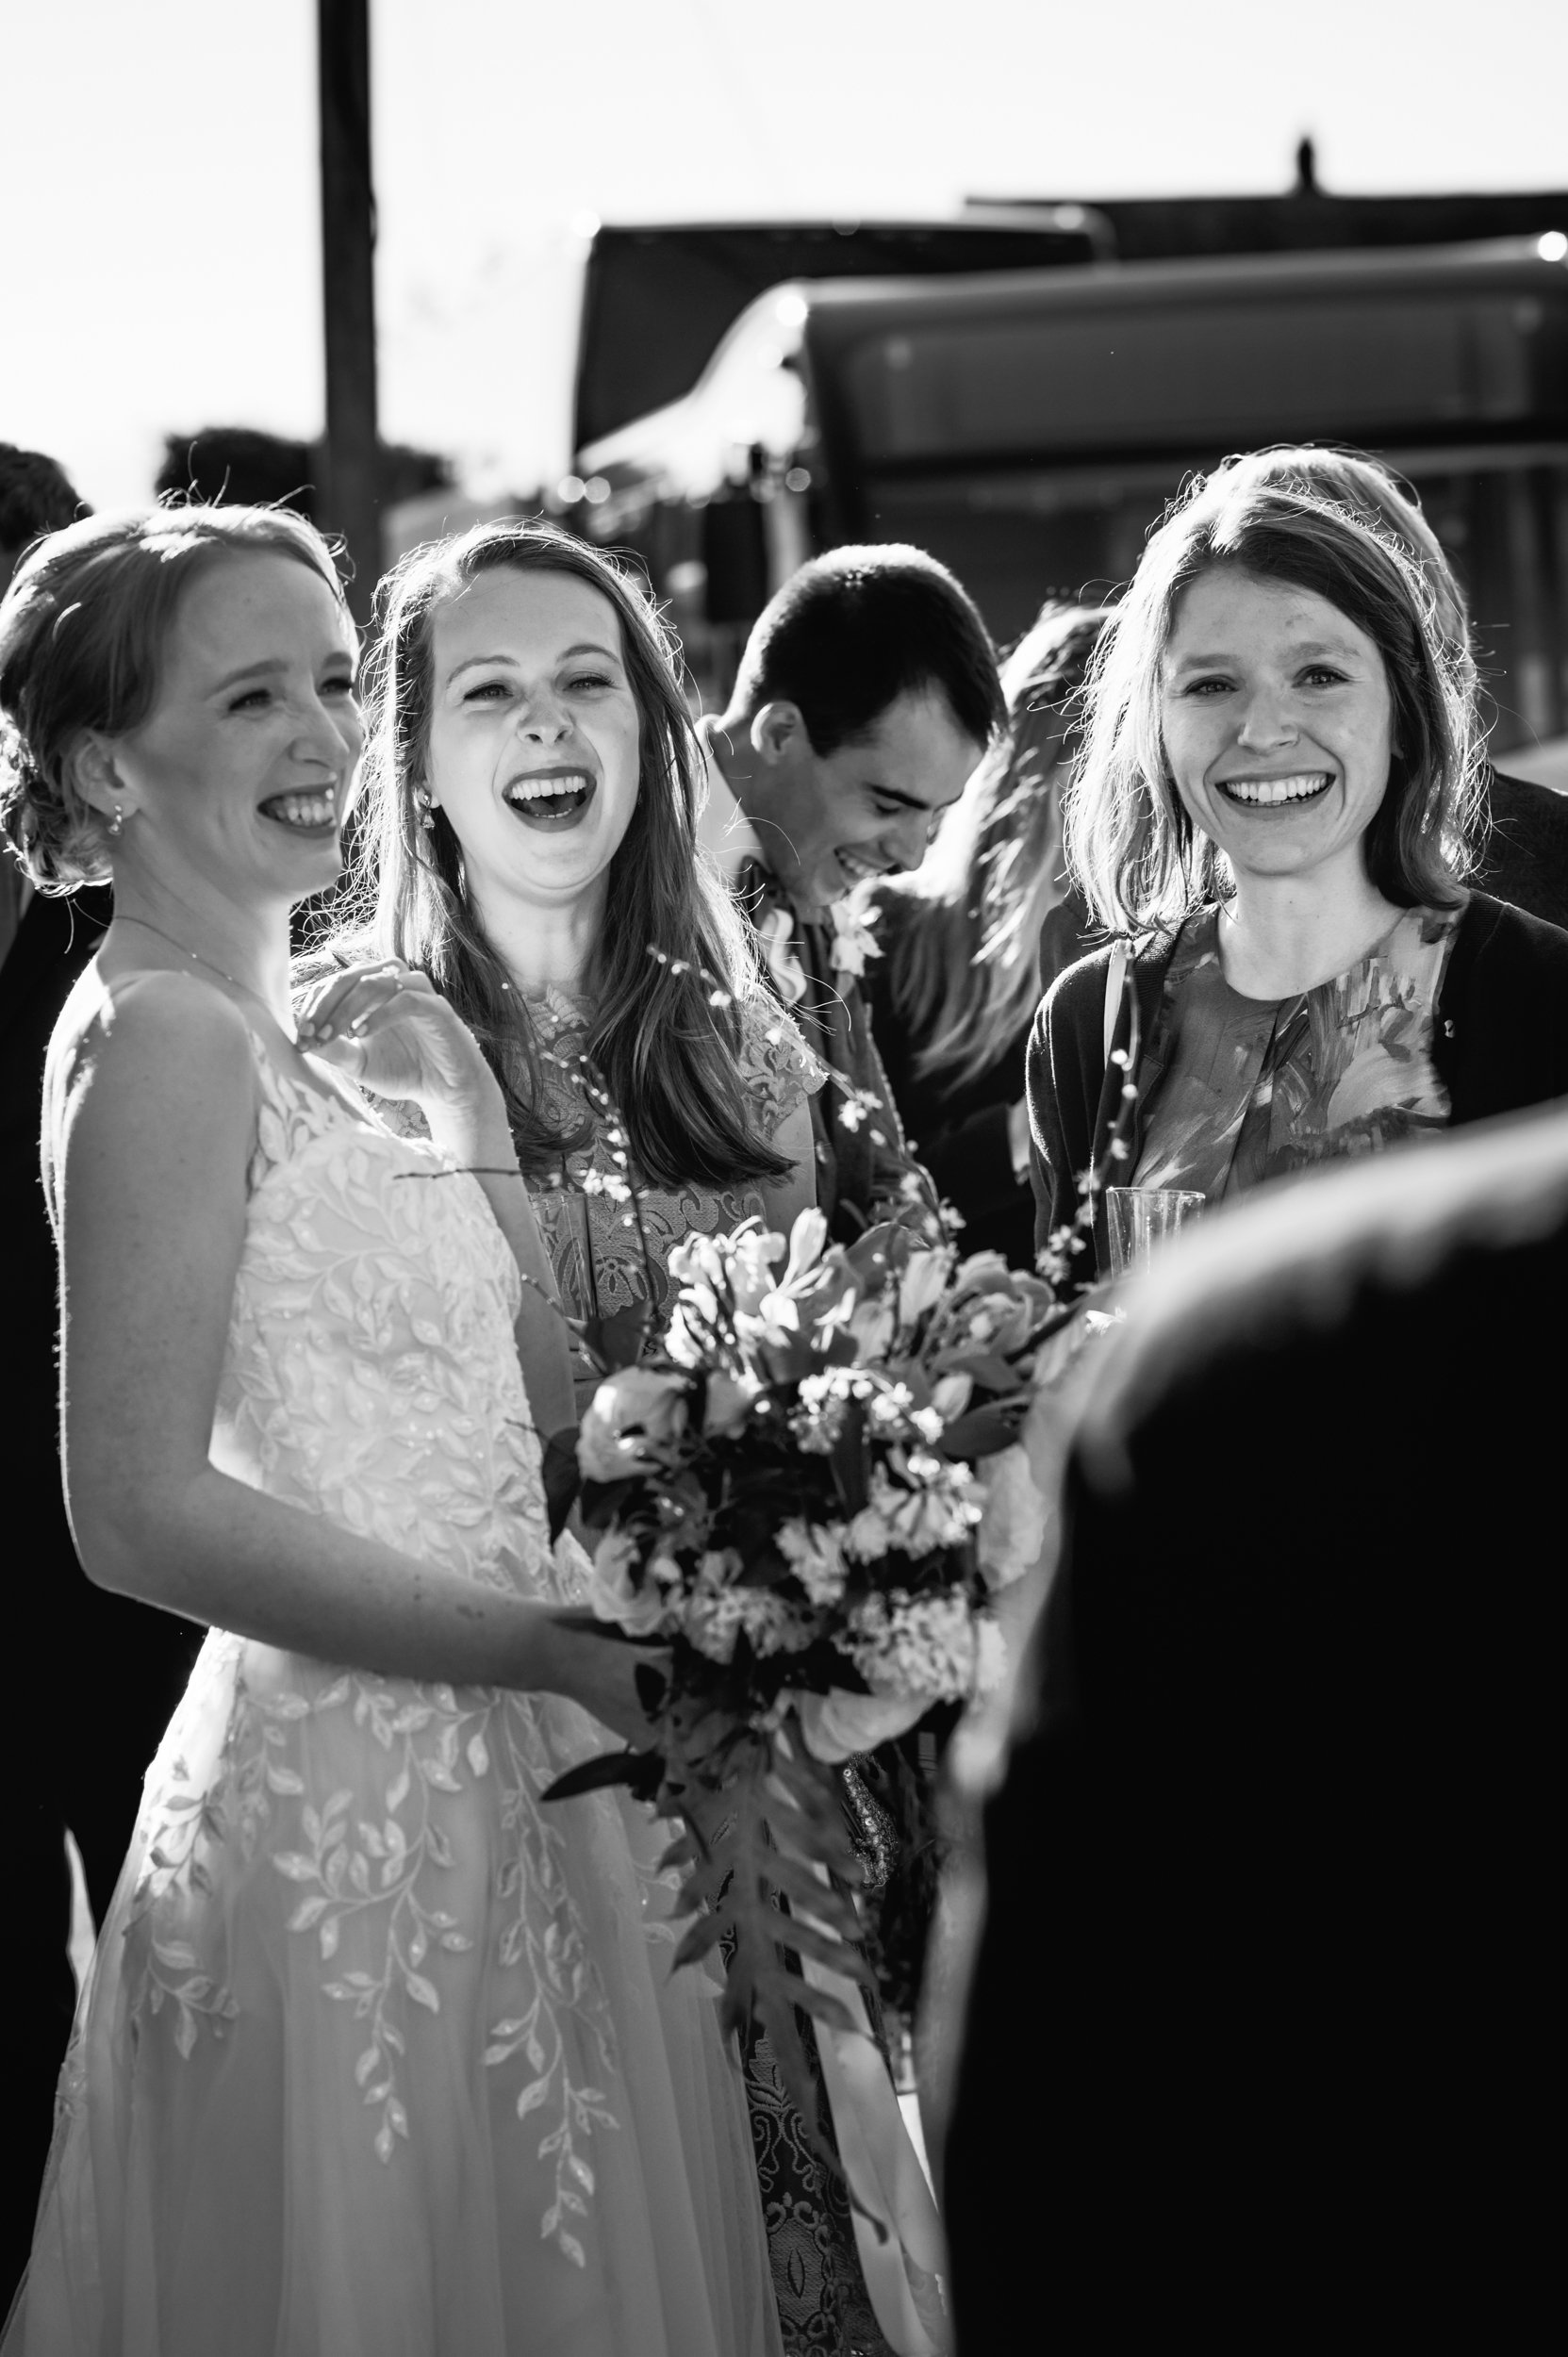  Reportage and candid wedding photography, Hertfordshire weddings by wedding photographer, Diana Hagues Photographer. 